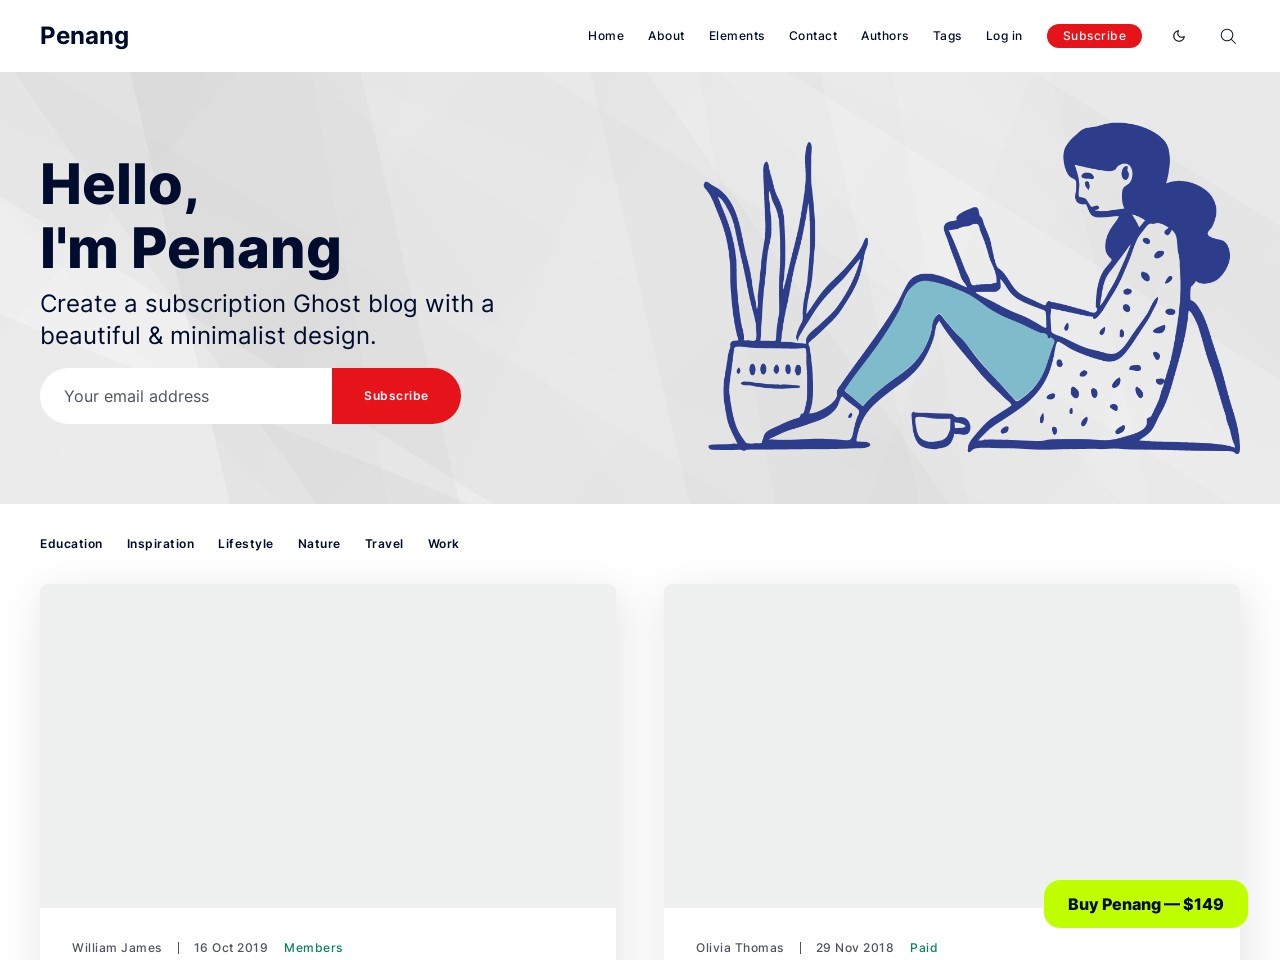 Penang - Membership and Subscription Ghost 4.0 Theme